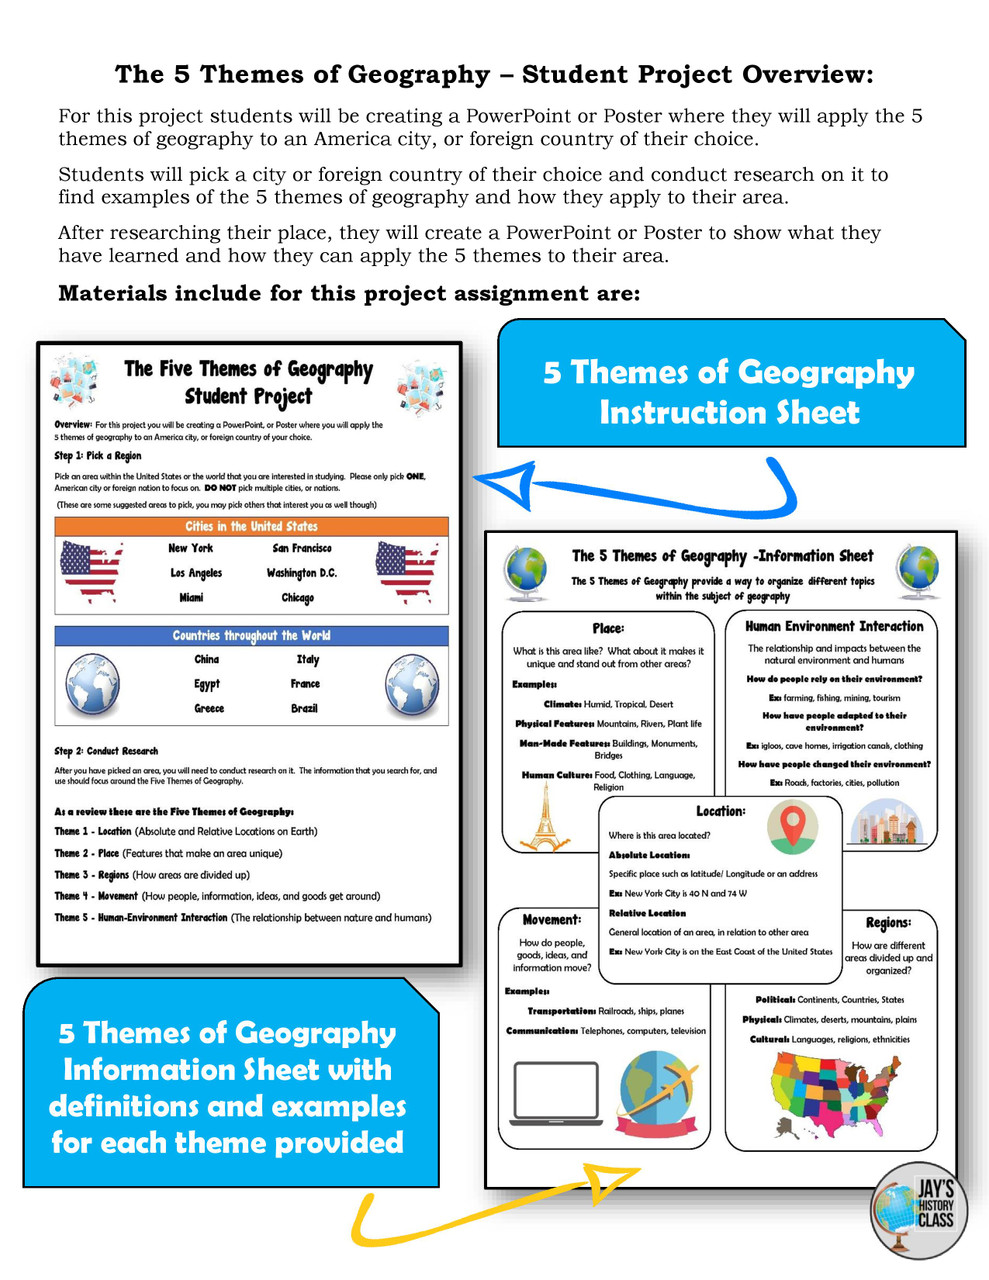 The 5 Themes of Geography: Student Project